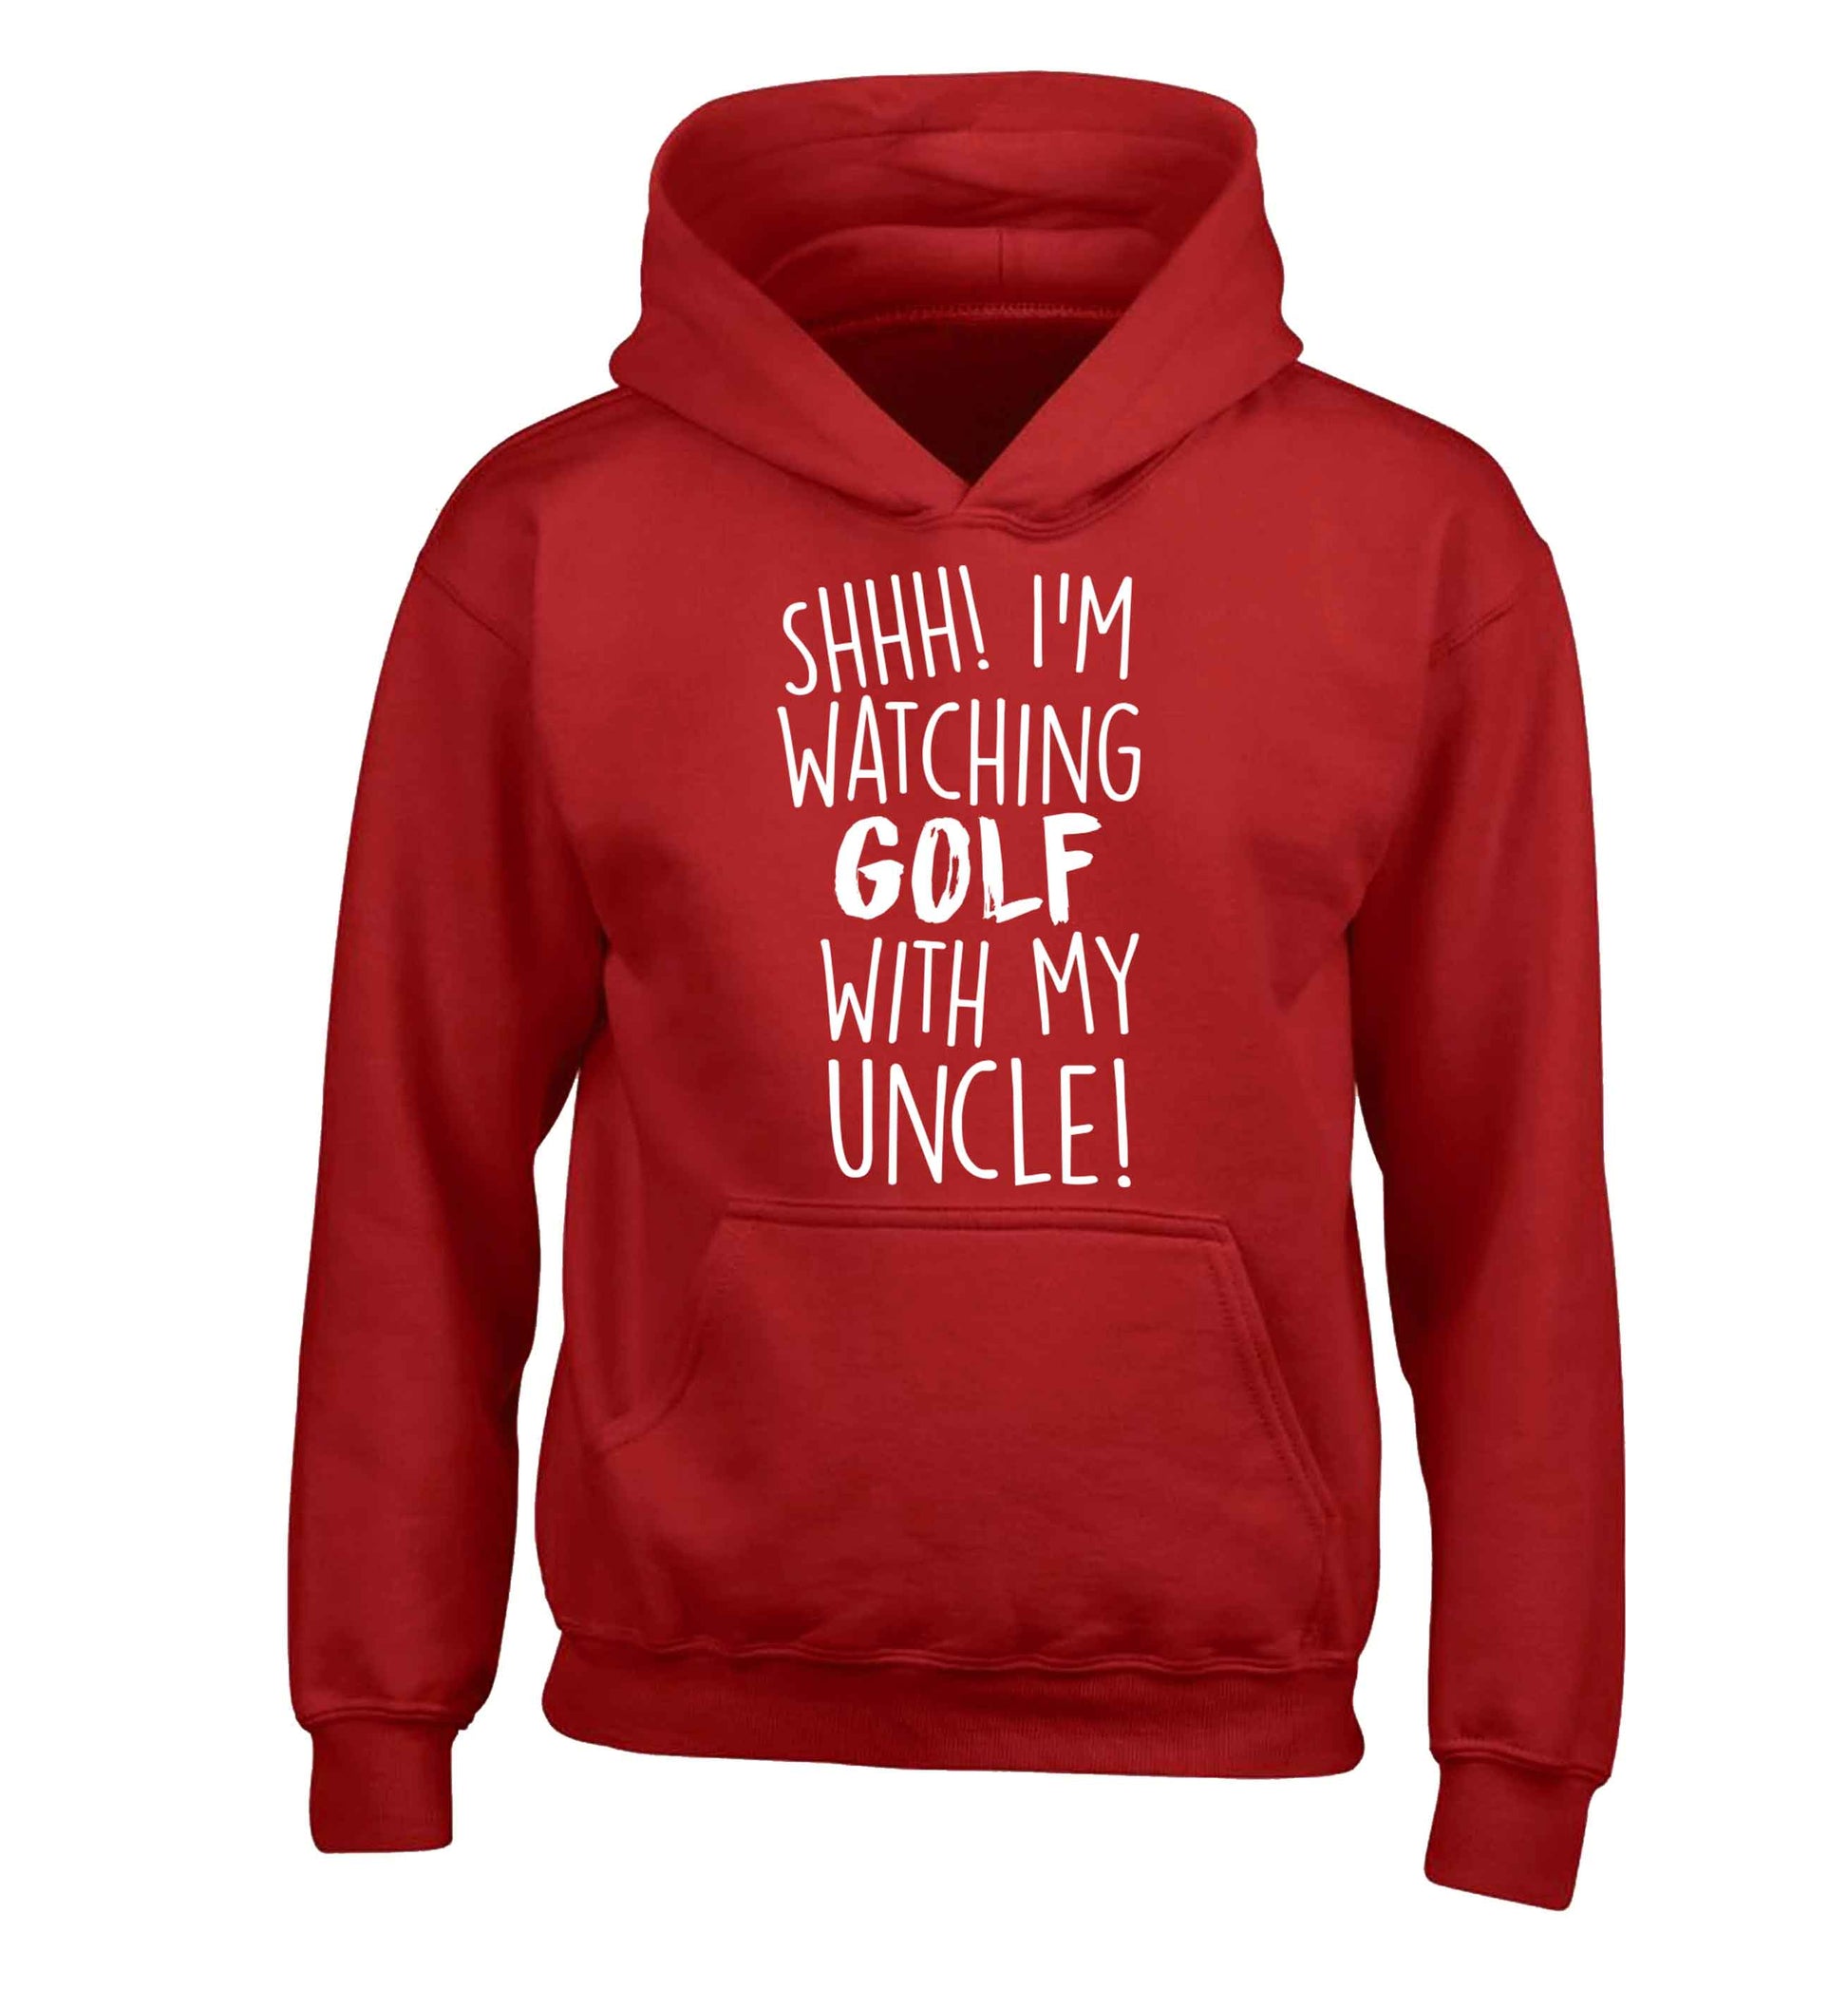 Shh I'm watching golf with my uncle children's red hoodie 12-13 Years